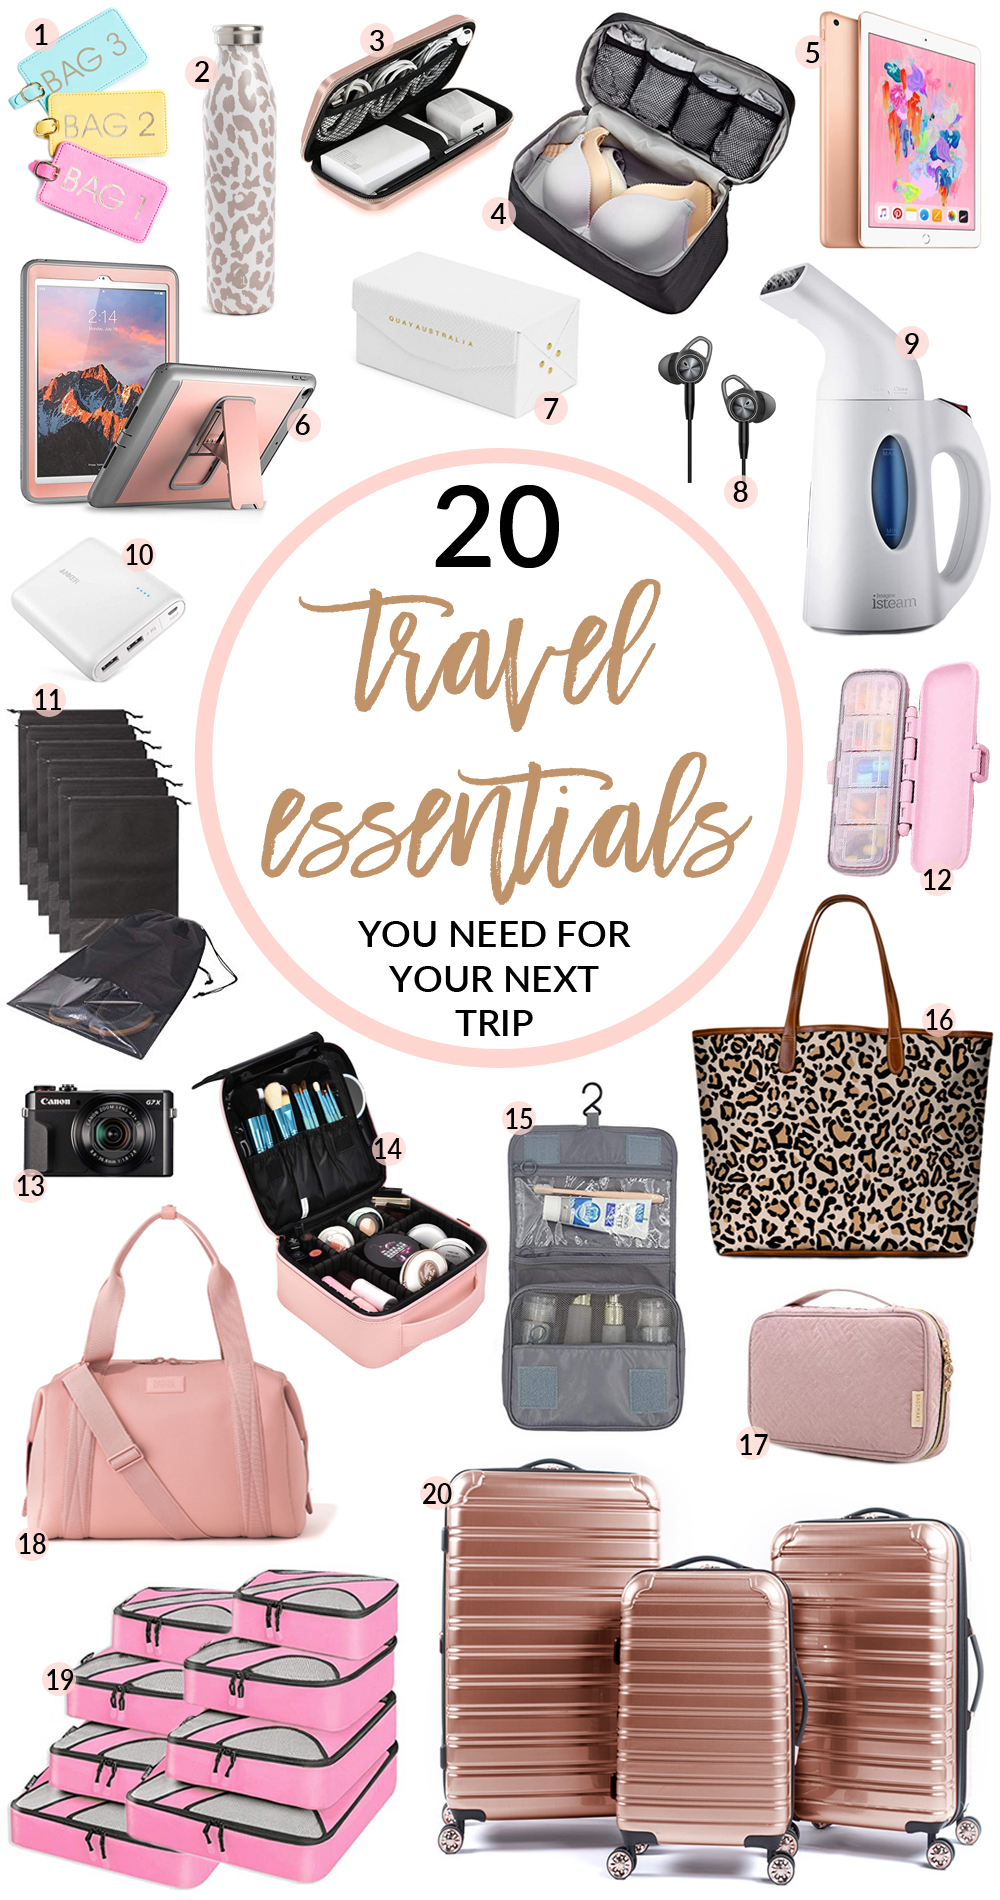 Travel-Tested Road Trip Packing List Essentials: Your Complete Guide